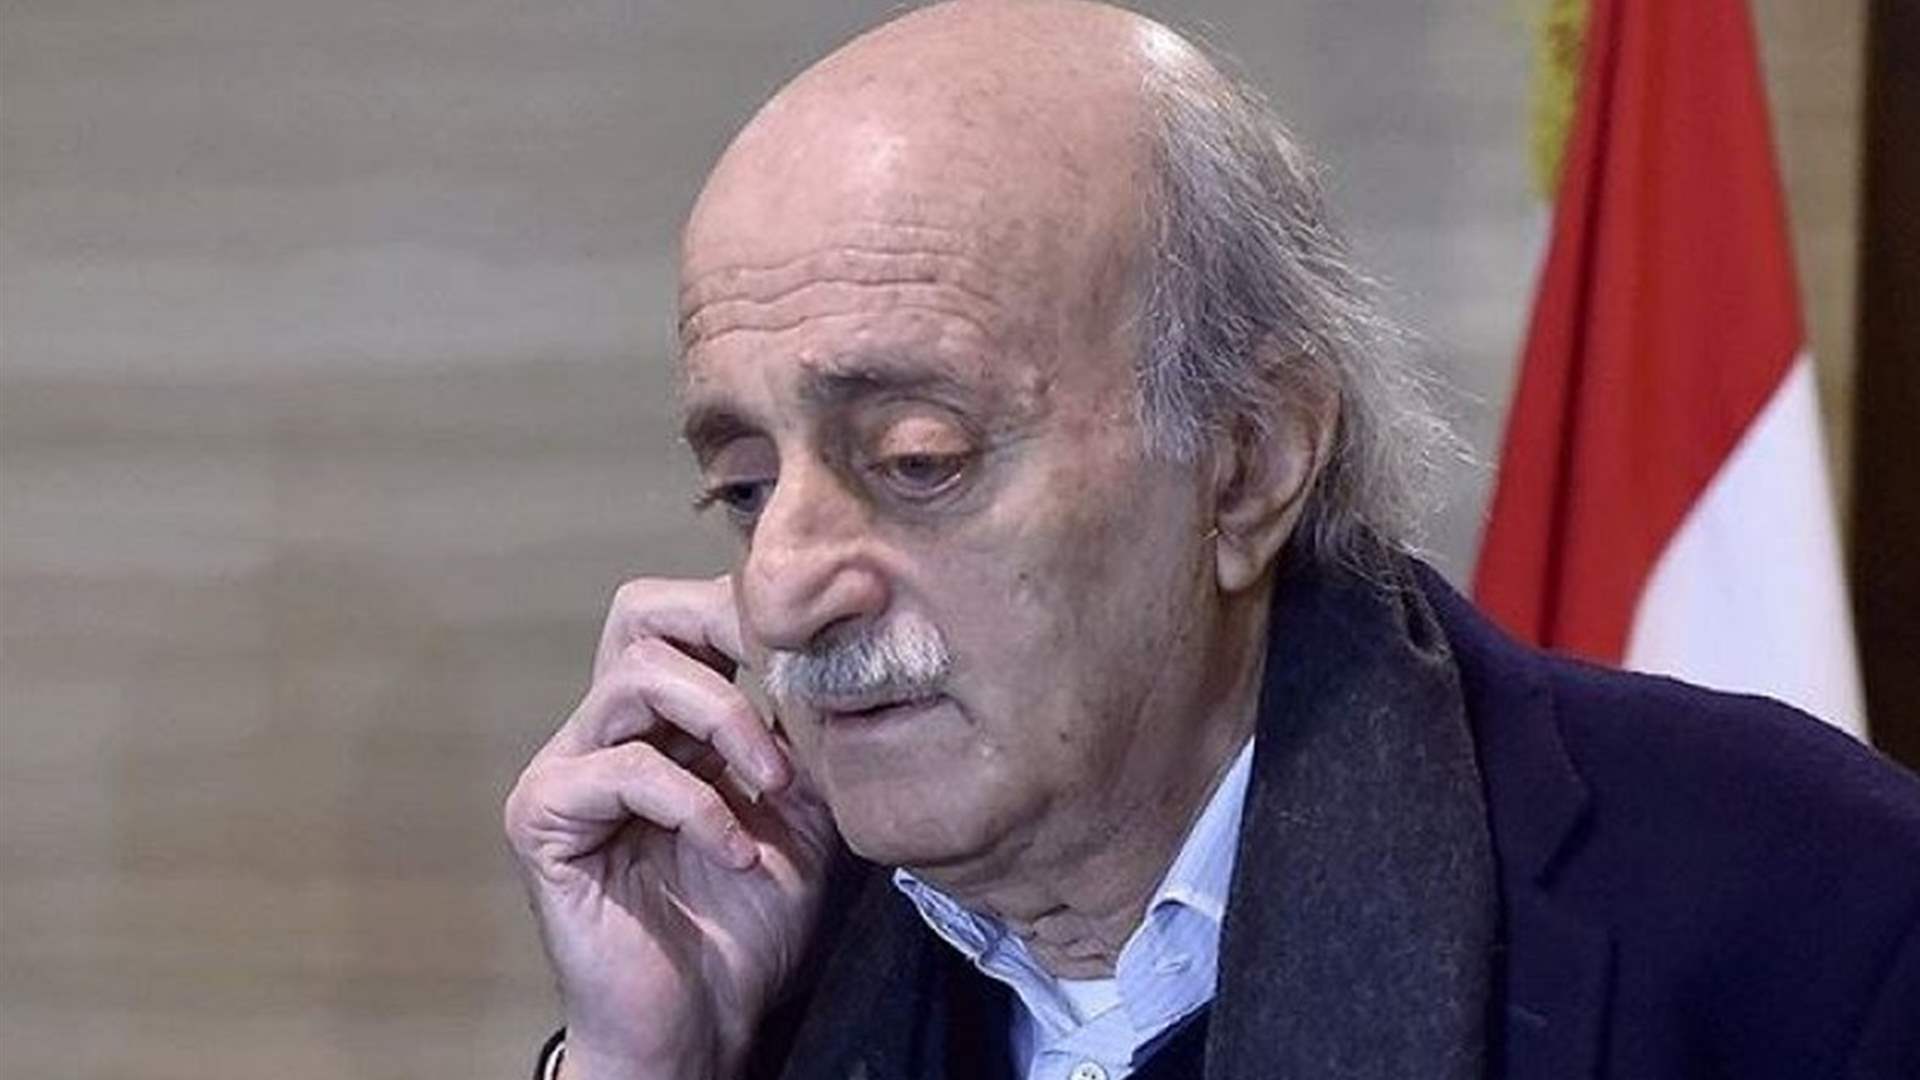 PSP Leader Walid Jumblatt resigns from party presidency, calls for general party elections conference on June 25th